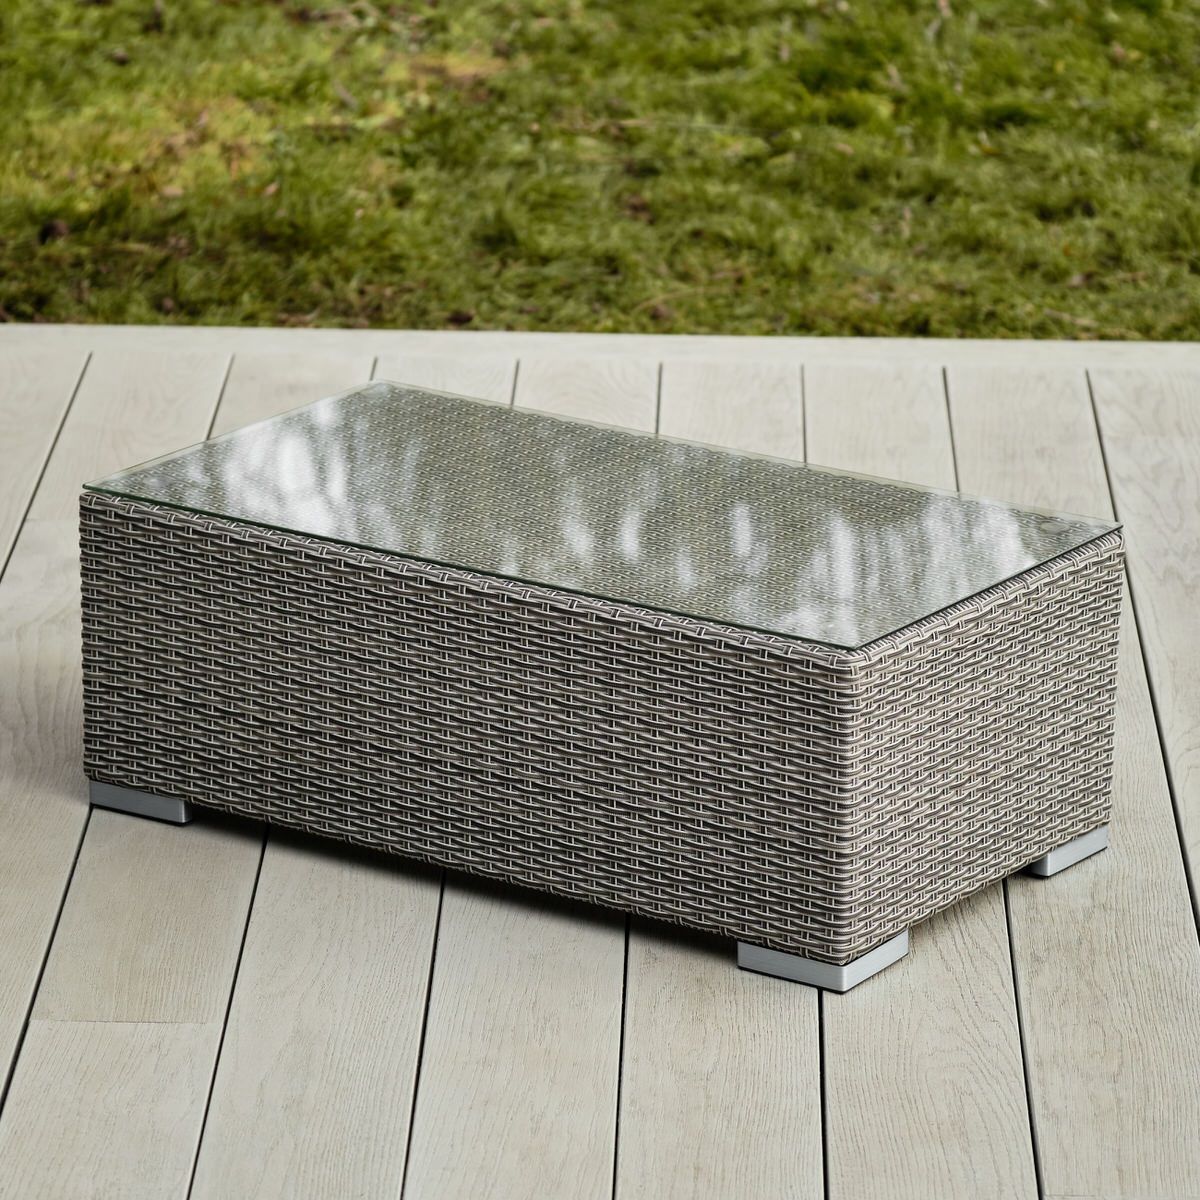 Cologne Rattan Coffee Table | Woodberry With Regard To Waterproof Coffee Tables (Gallery 1 of 21)